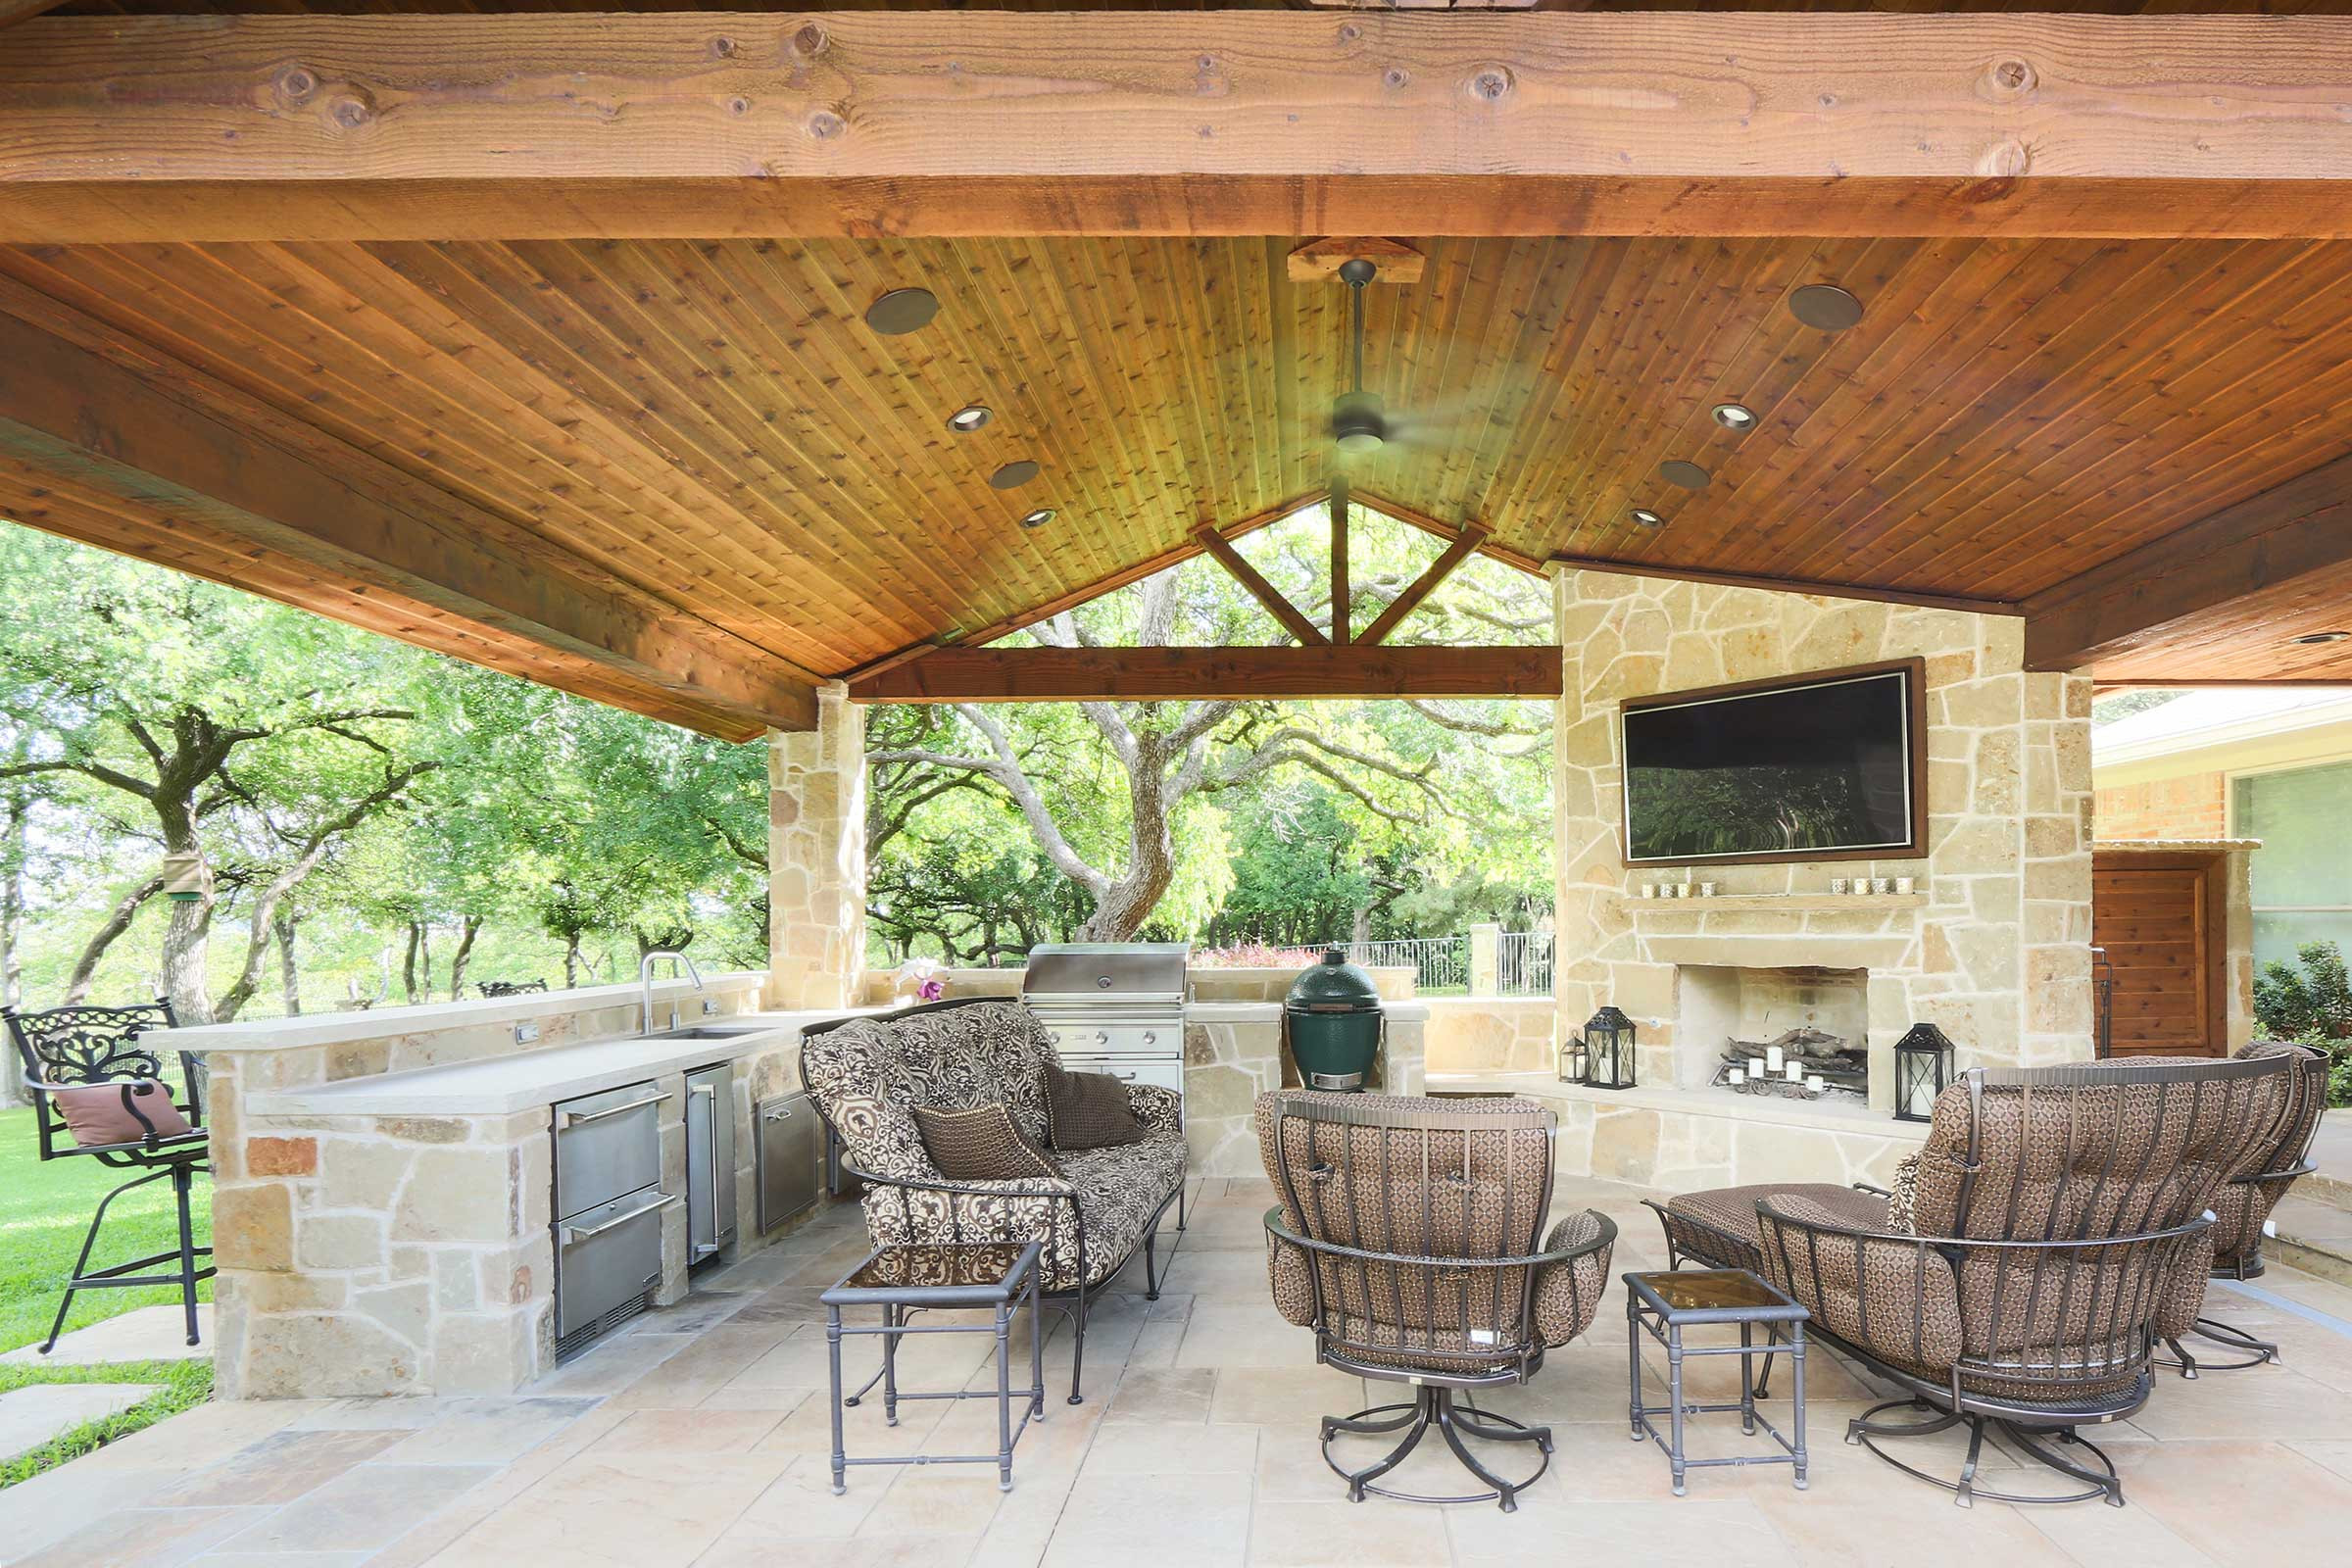 Covered Outdoor Kitchen Structures
 Outdoor Kitchens Fireplaces